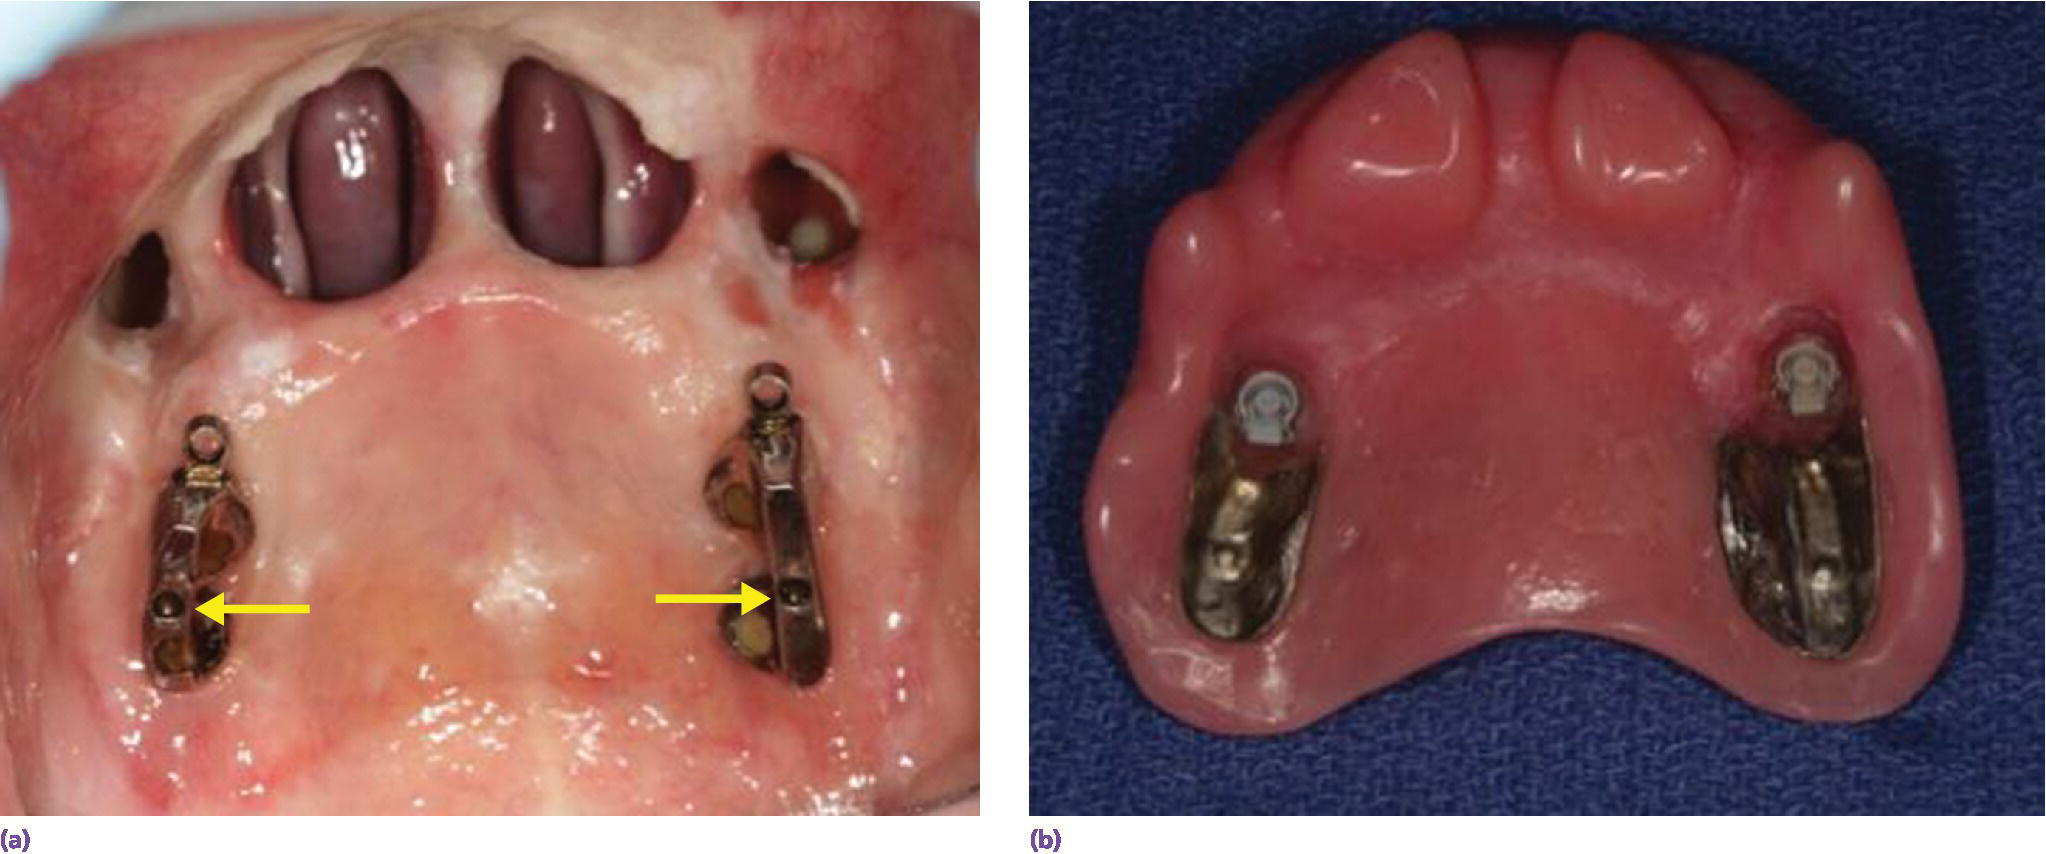 2 photos displaying a typical defect restored with implants: (a) implants connecting bar and (b) definitive prosthesis (c) prosthesis in position.